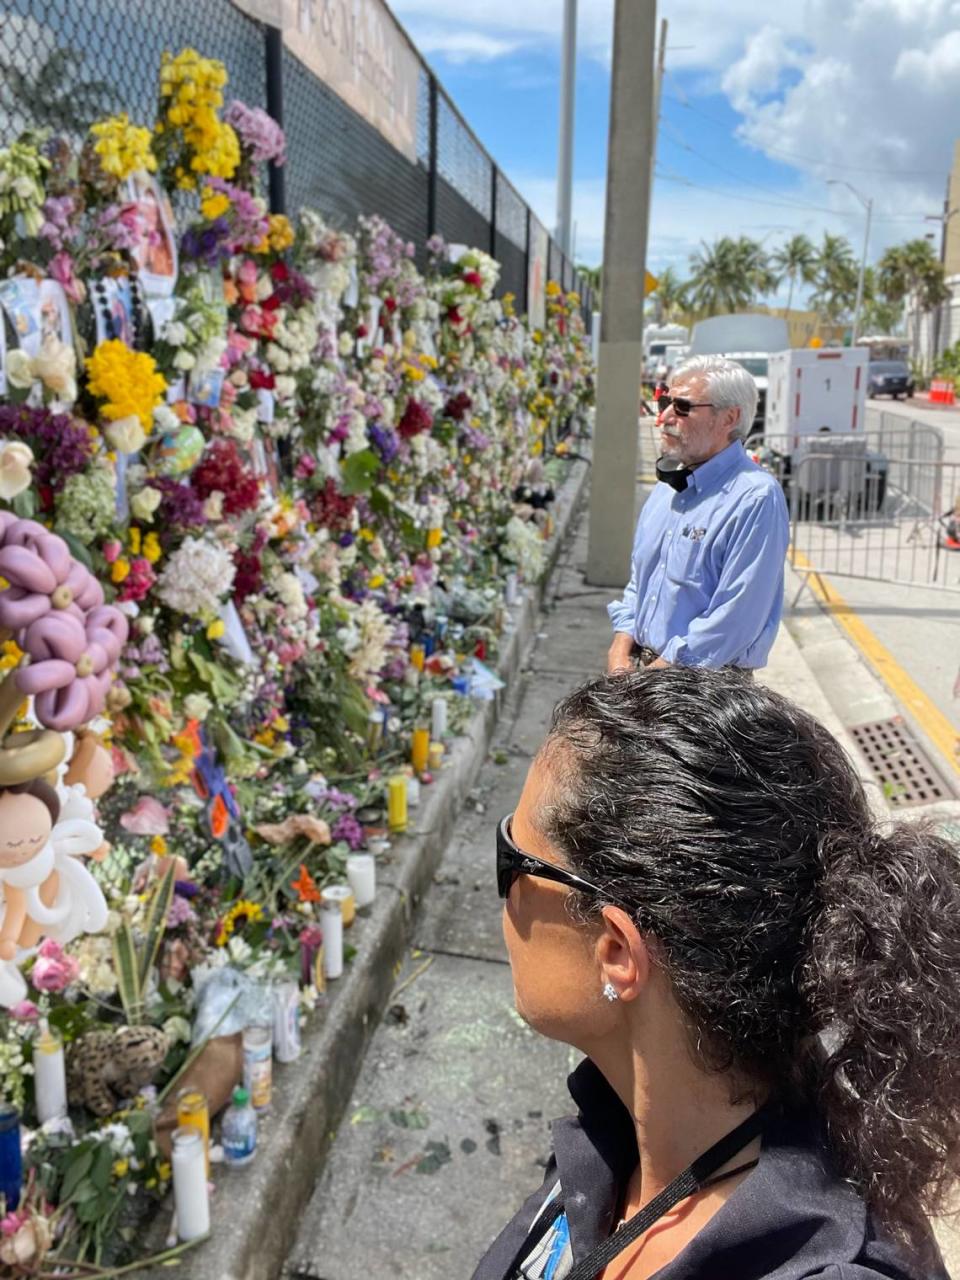 Greater Miami Jewish Federation President & CEO Jacob Solomon and Greater Miami Jewish Federation Office of Community Security Director Stephanie Viegas visit the memorial for victims of the collapse of Champlain Towers South in Surfside.